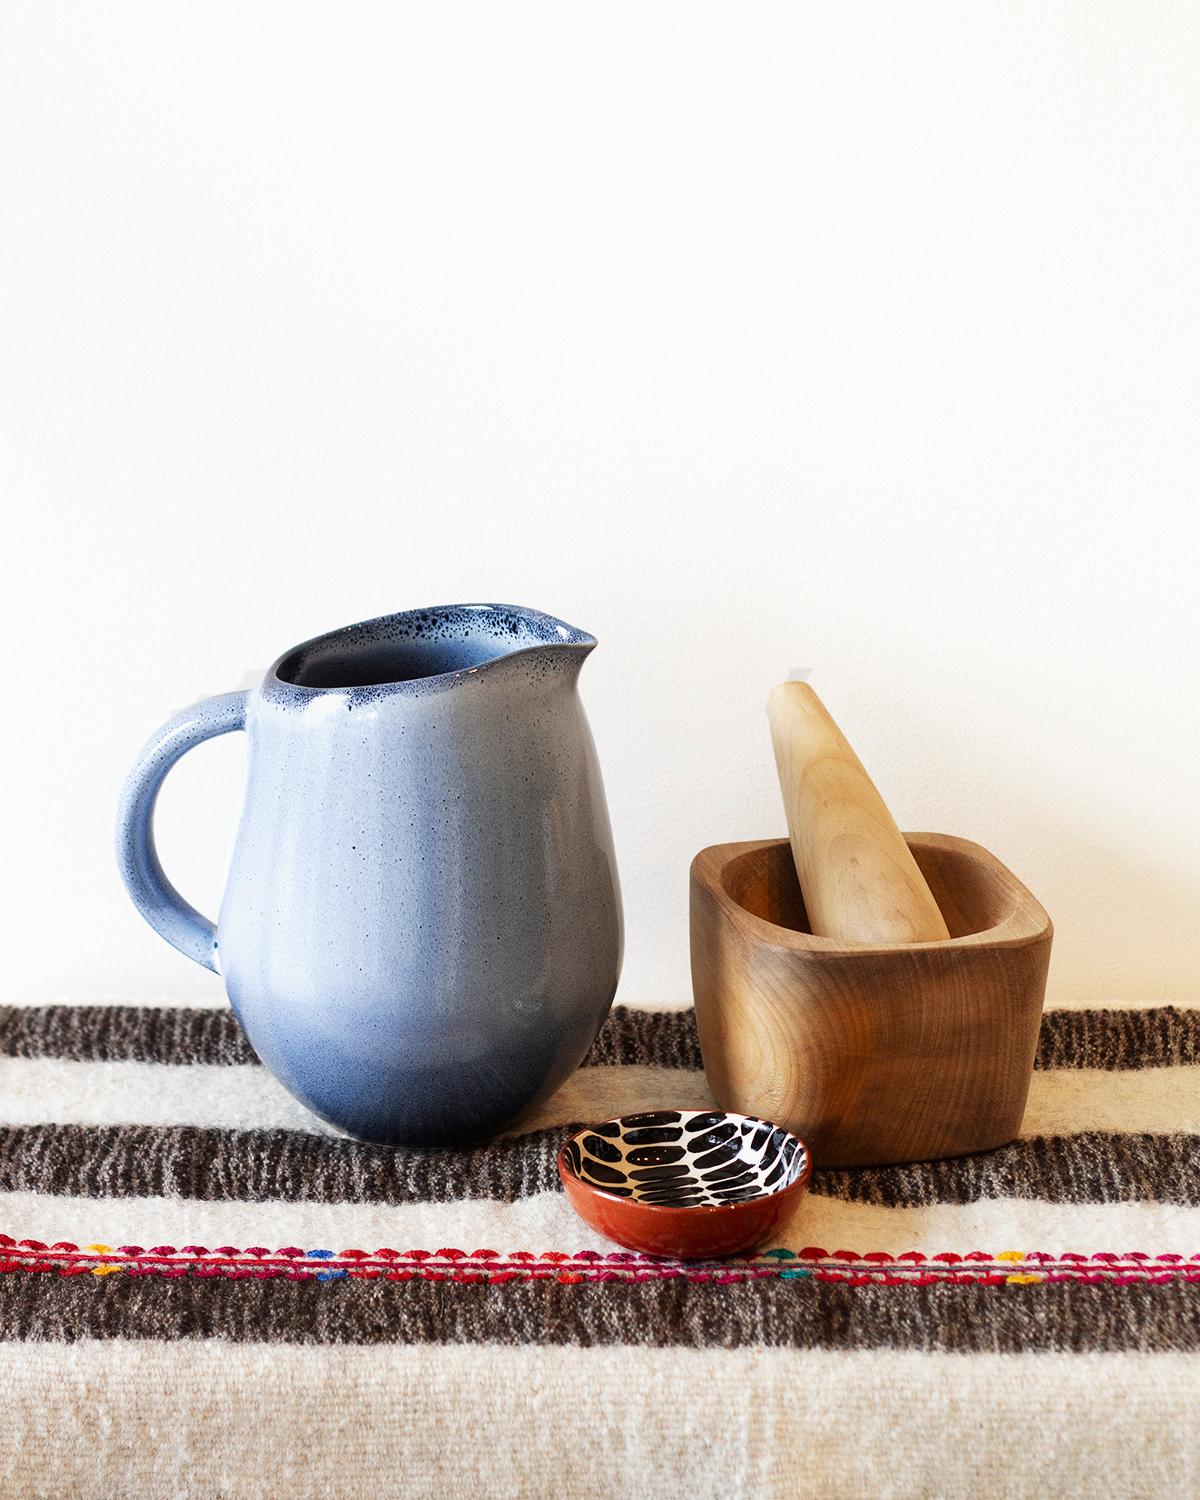 This beautiful Laurel Hand Carved Solid Wood Mortar and Pestle is crafted from solid wood, creating a warm, natural look perfect for any rustic or organic-modern kitchen. Its minimalist, artisanal design makes this cooking tool the perfect practical